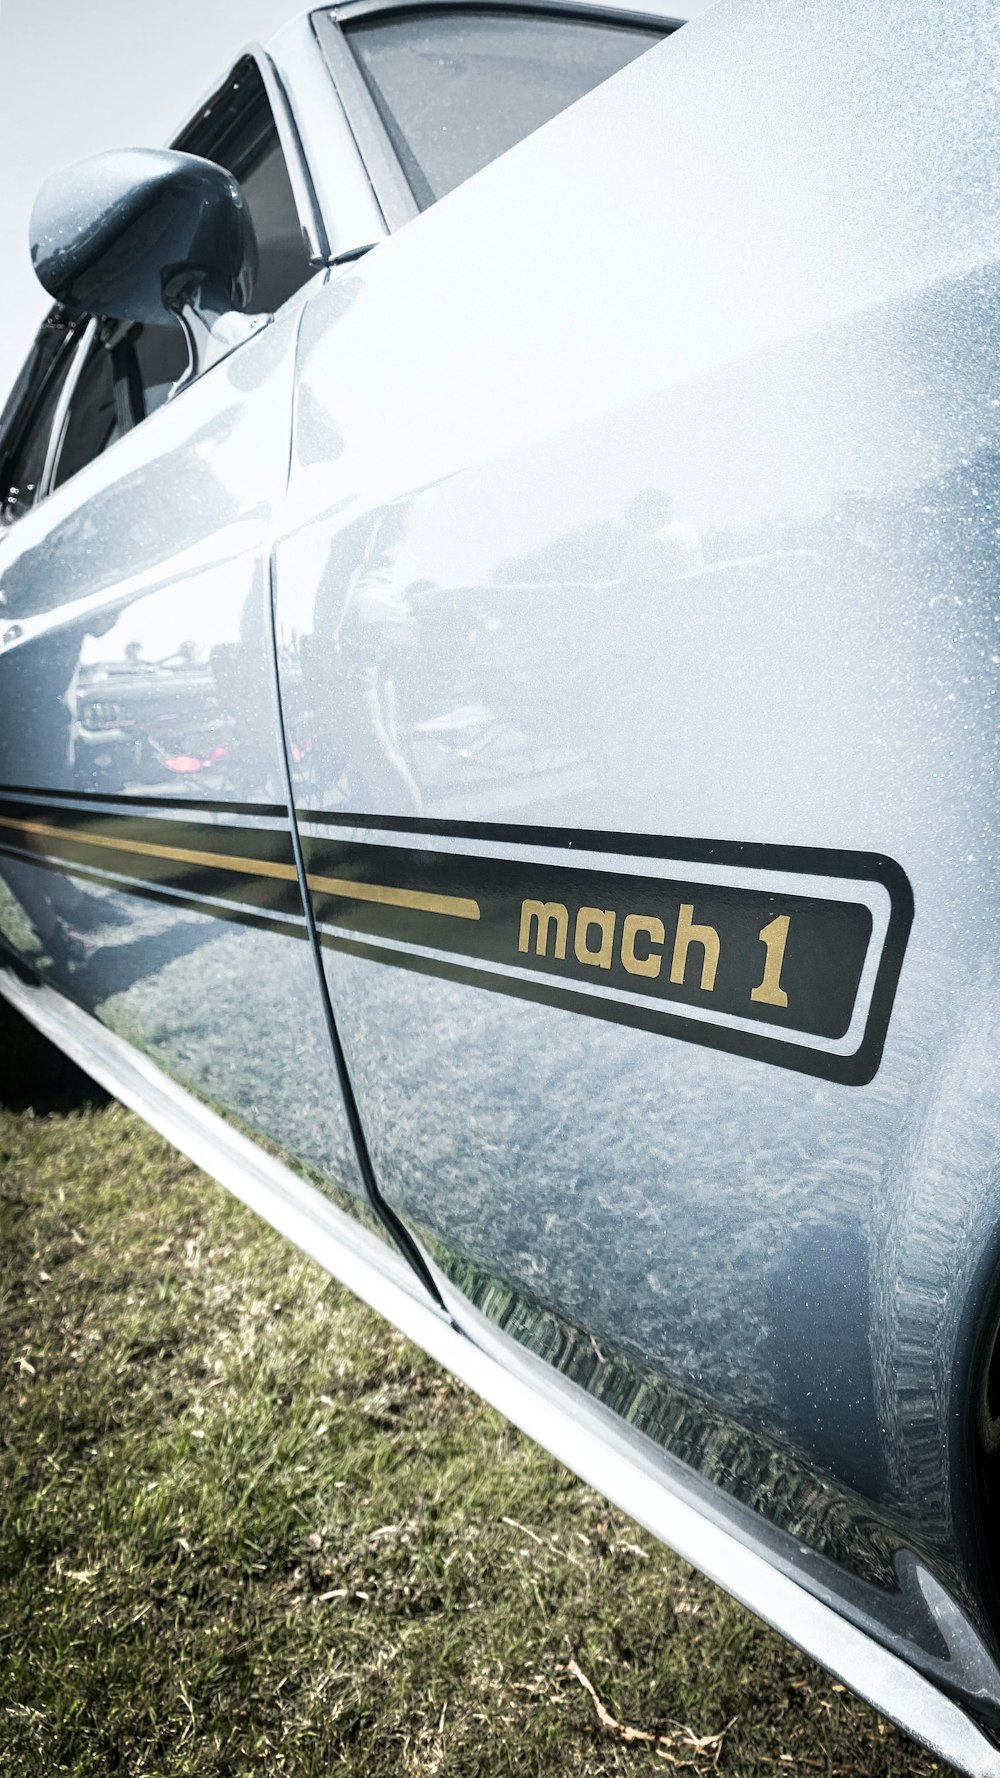 parked gray Mach 1 vehicle during daytime